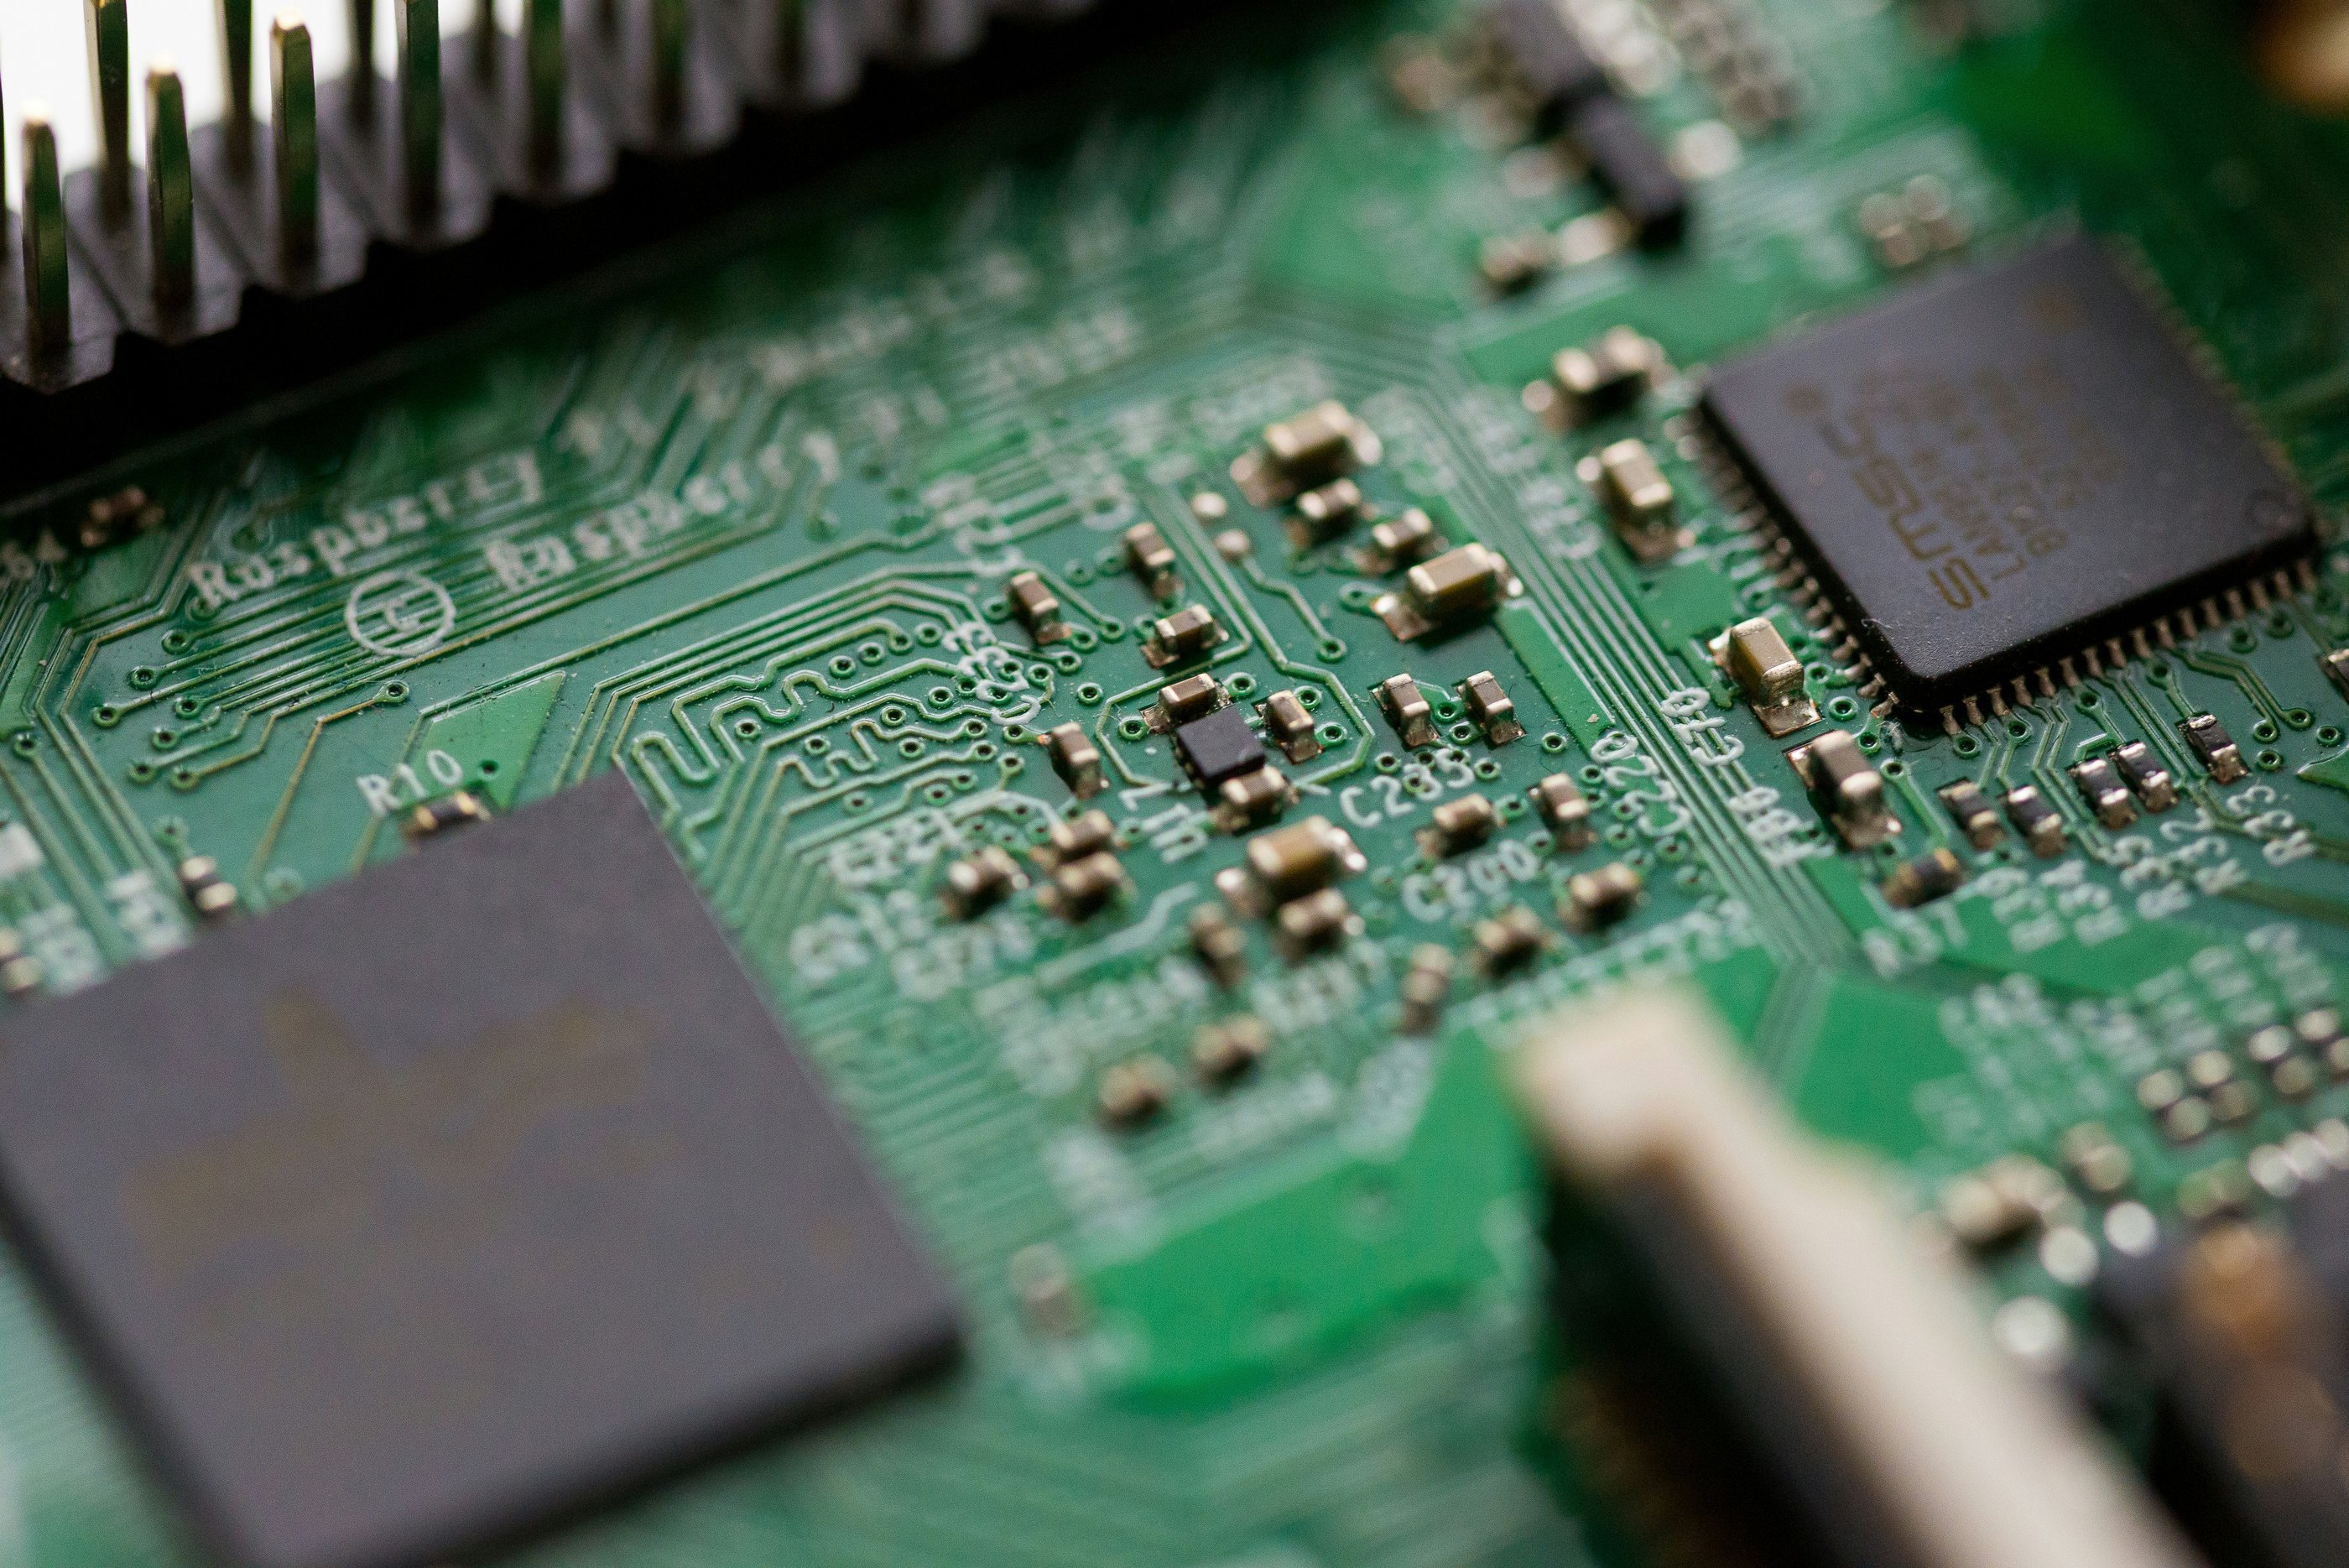 A close up of a green electrical circuit board